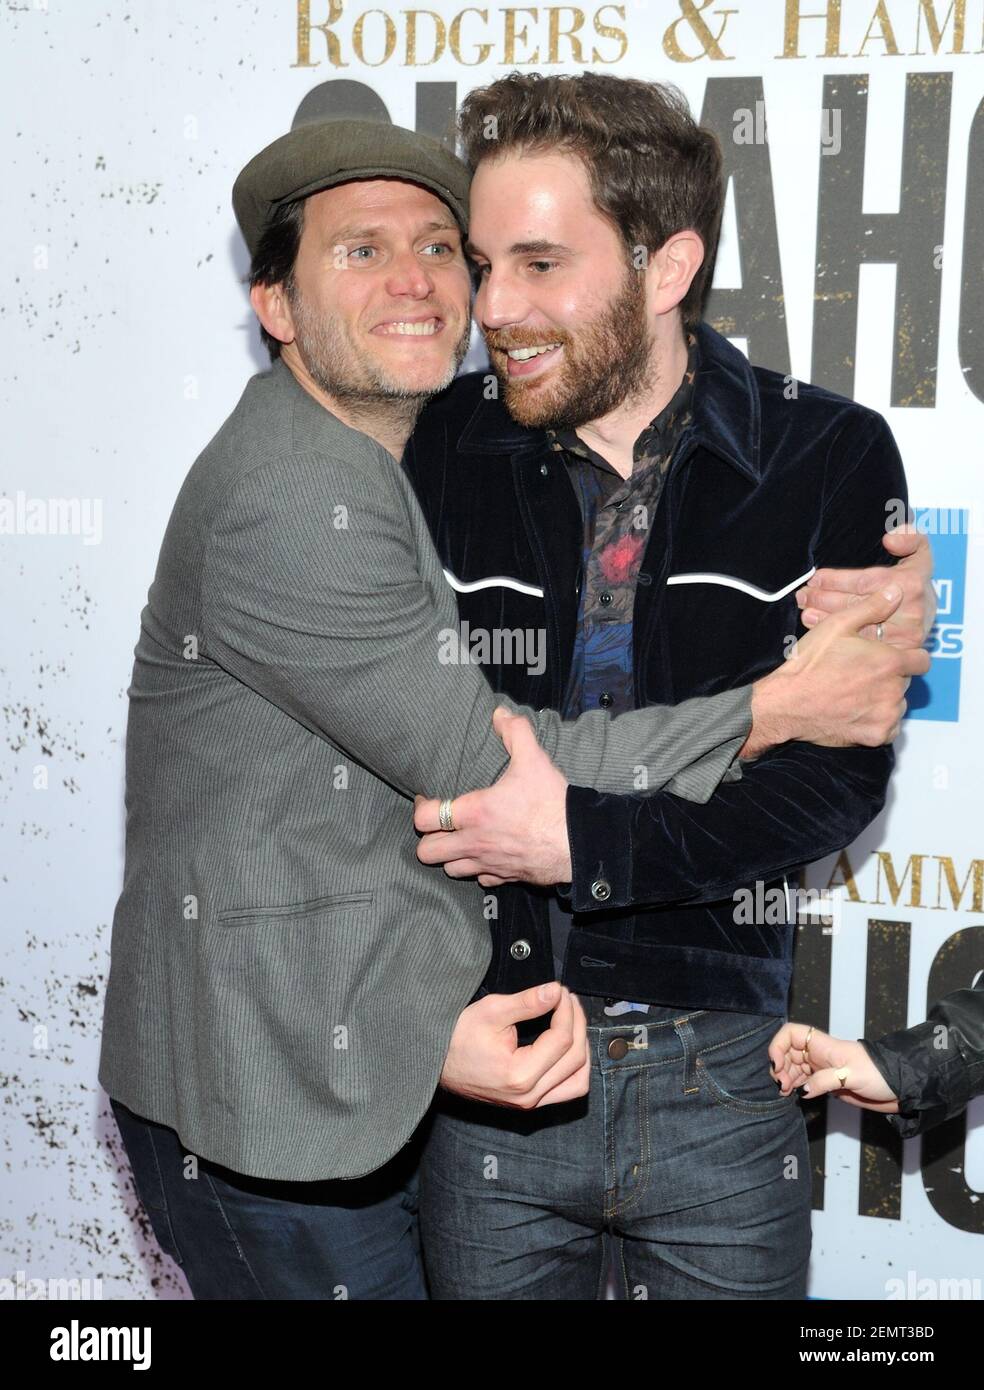 L-R: Actors Steven Pasquale and Ben Platt attend the opening performance of Oklahoma! at the Circle in the Square Theatre in New York, NY on April 7, 2019. (Photo by Stephen Smith/SIPA USA) Stock Photo